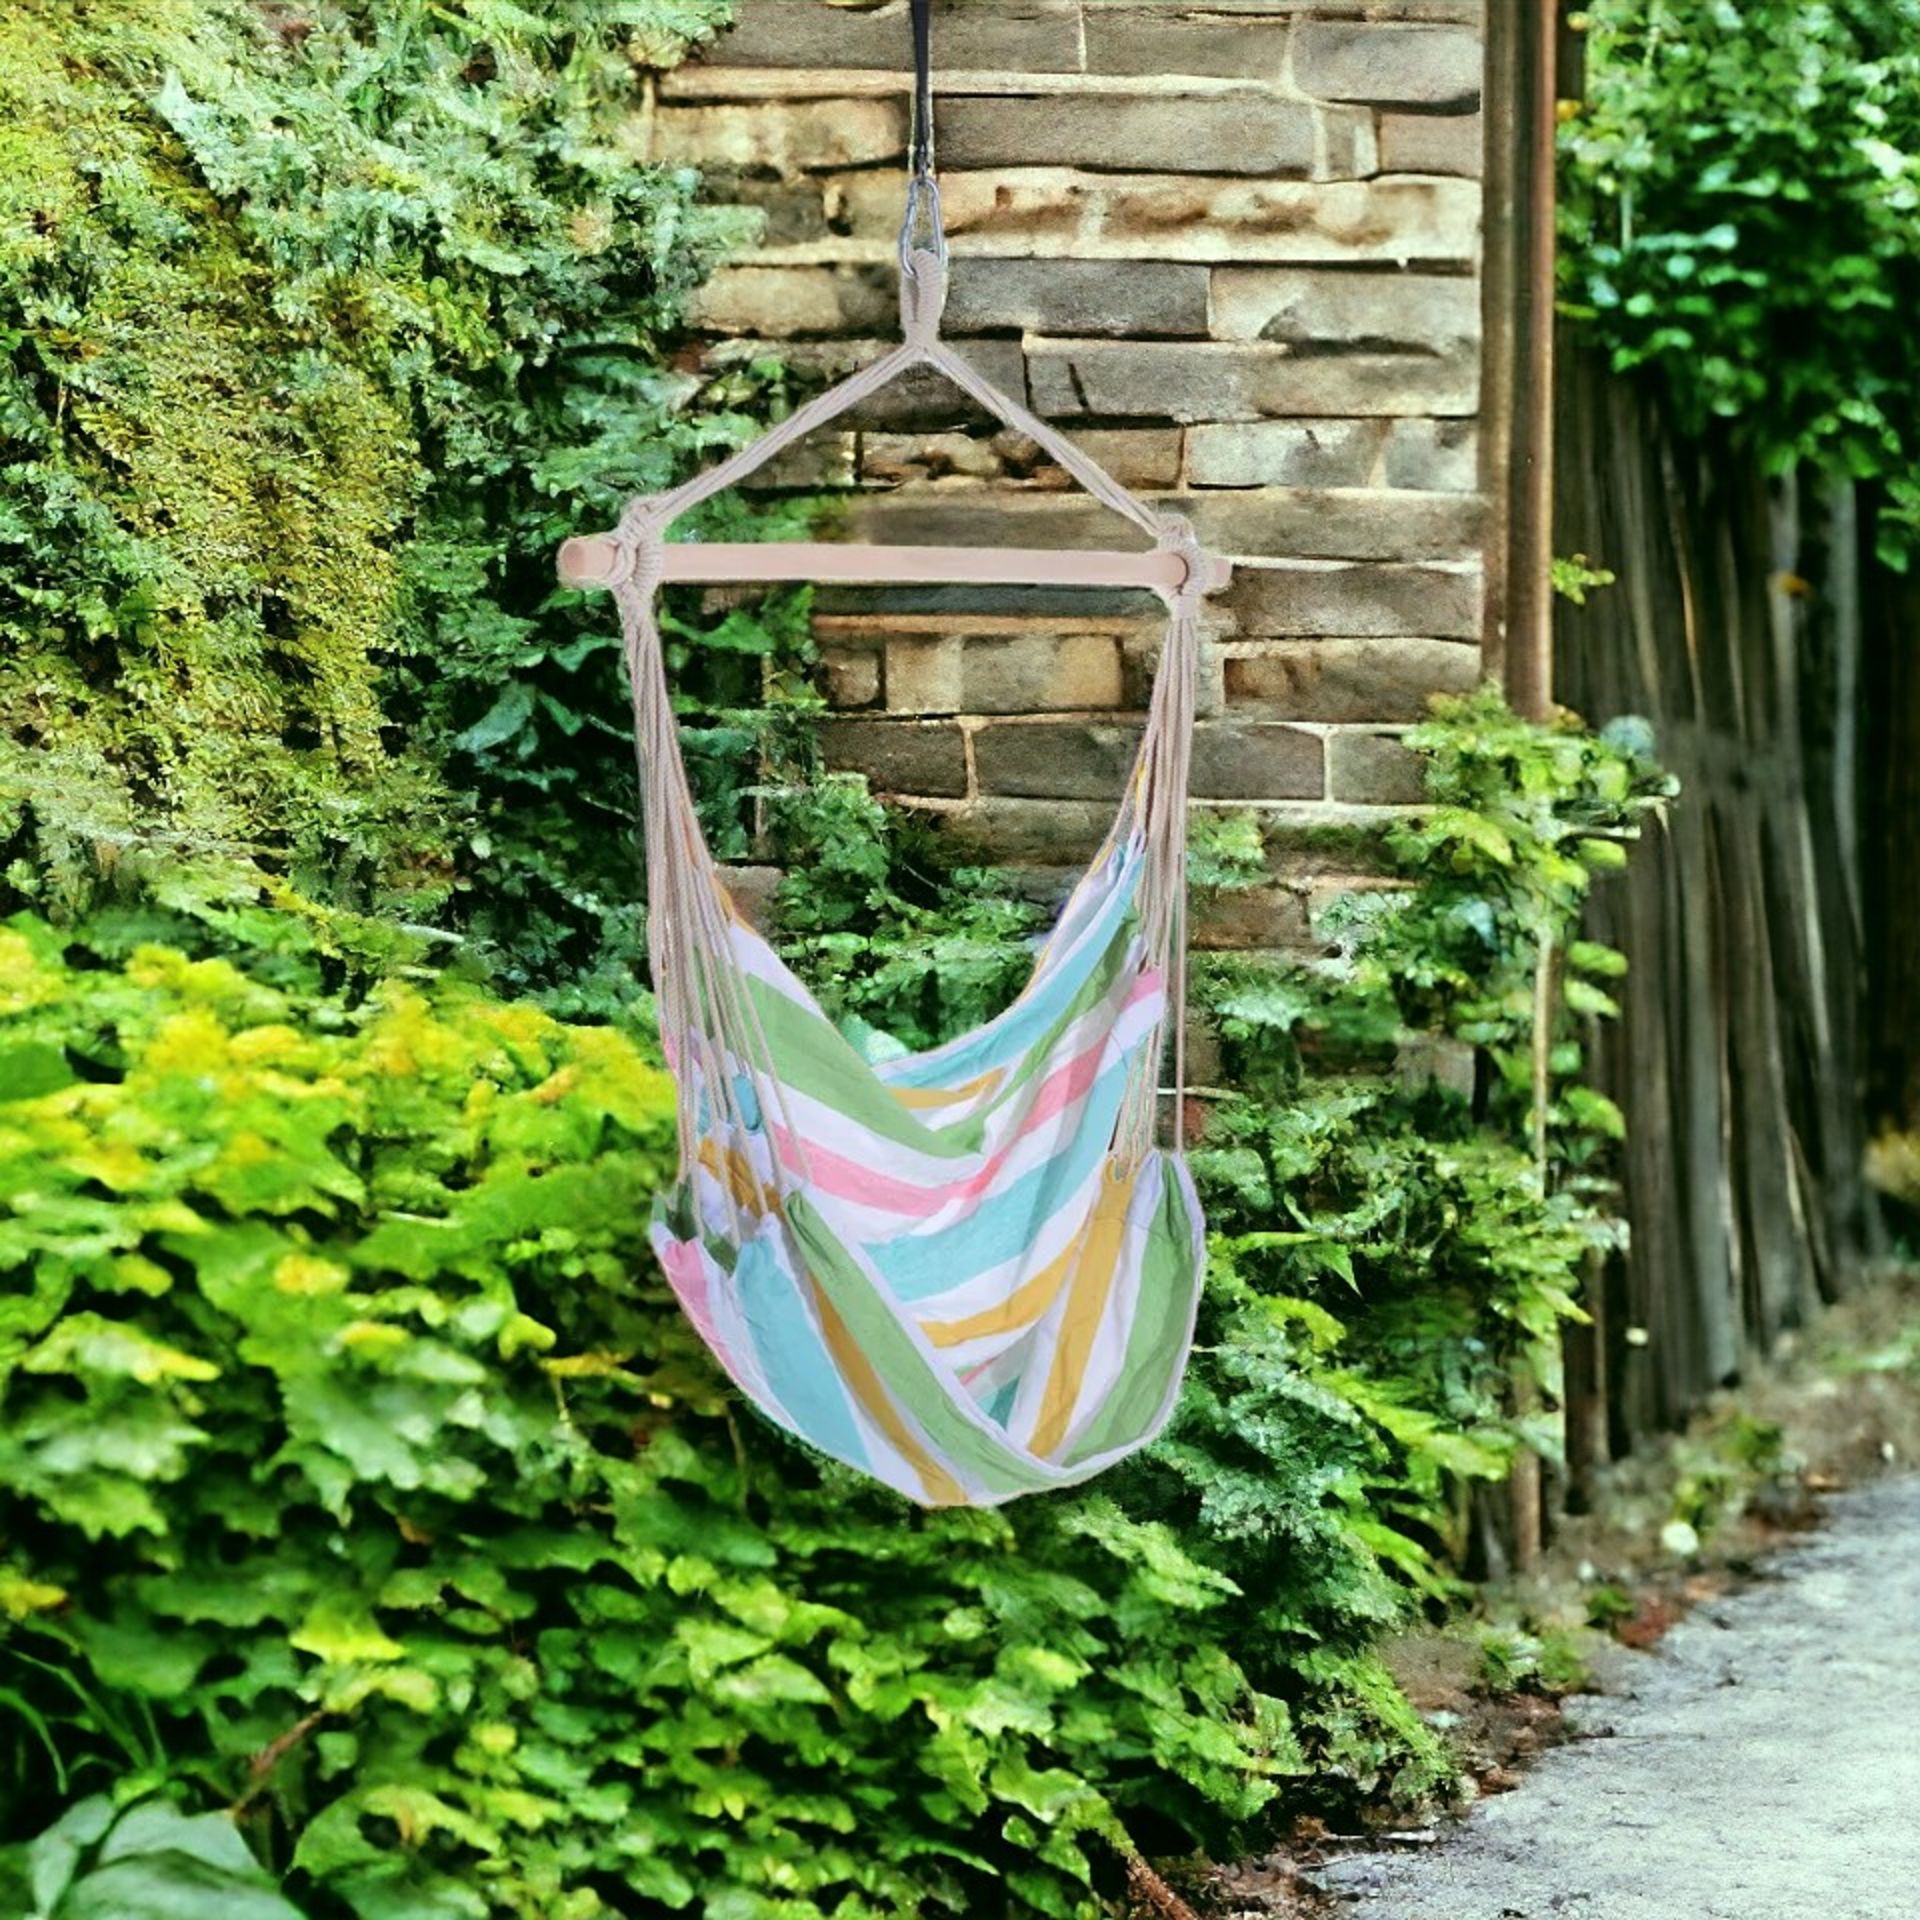 FREE DELIVERY - BRAND NEW GARDEN HAMMOCK CHAIR YARD HANGING ROPE COTTON CLOTH W/ ROPES GREEN - Image 2 of 2